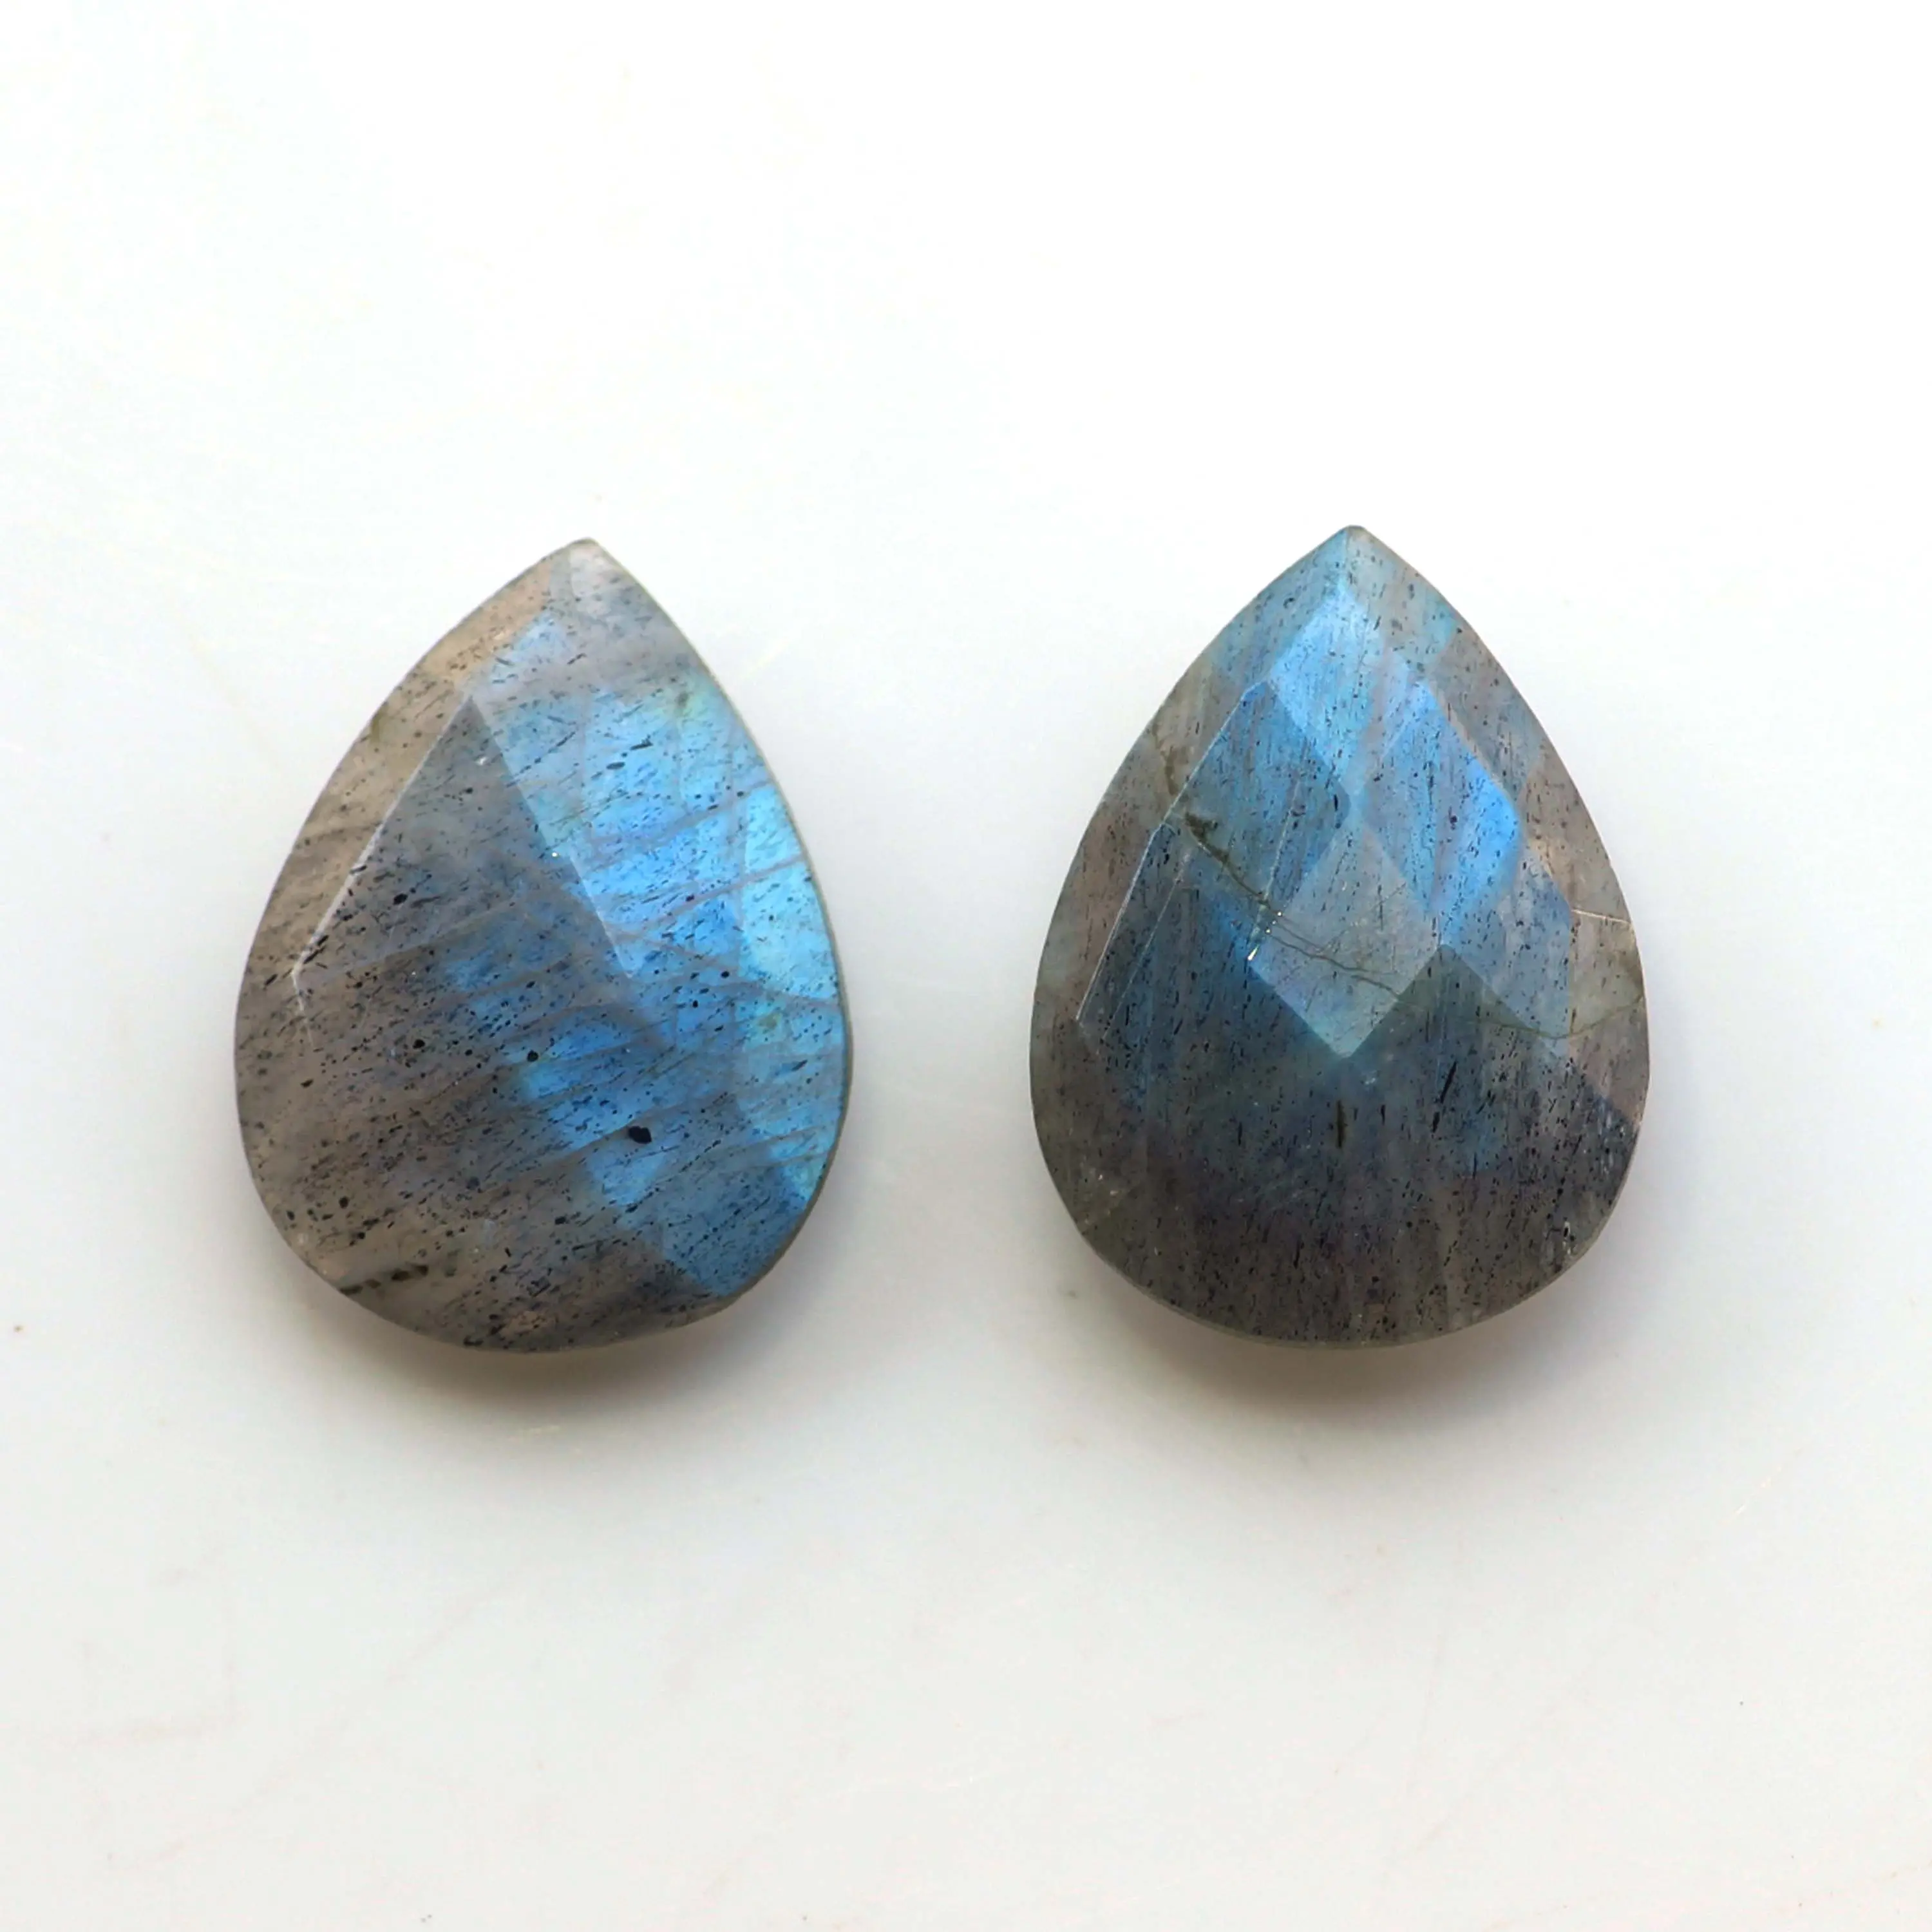 Top Quality 12x16mm Natural Blue Flashy Labradorite Faceted Pear Shape Briolette Labradorite Loose Gemstone For Making Jewelry